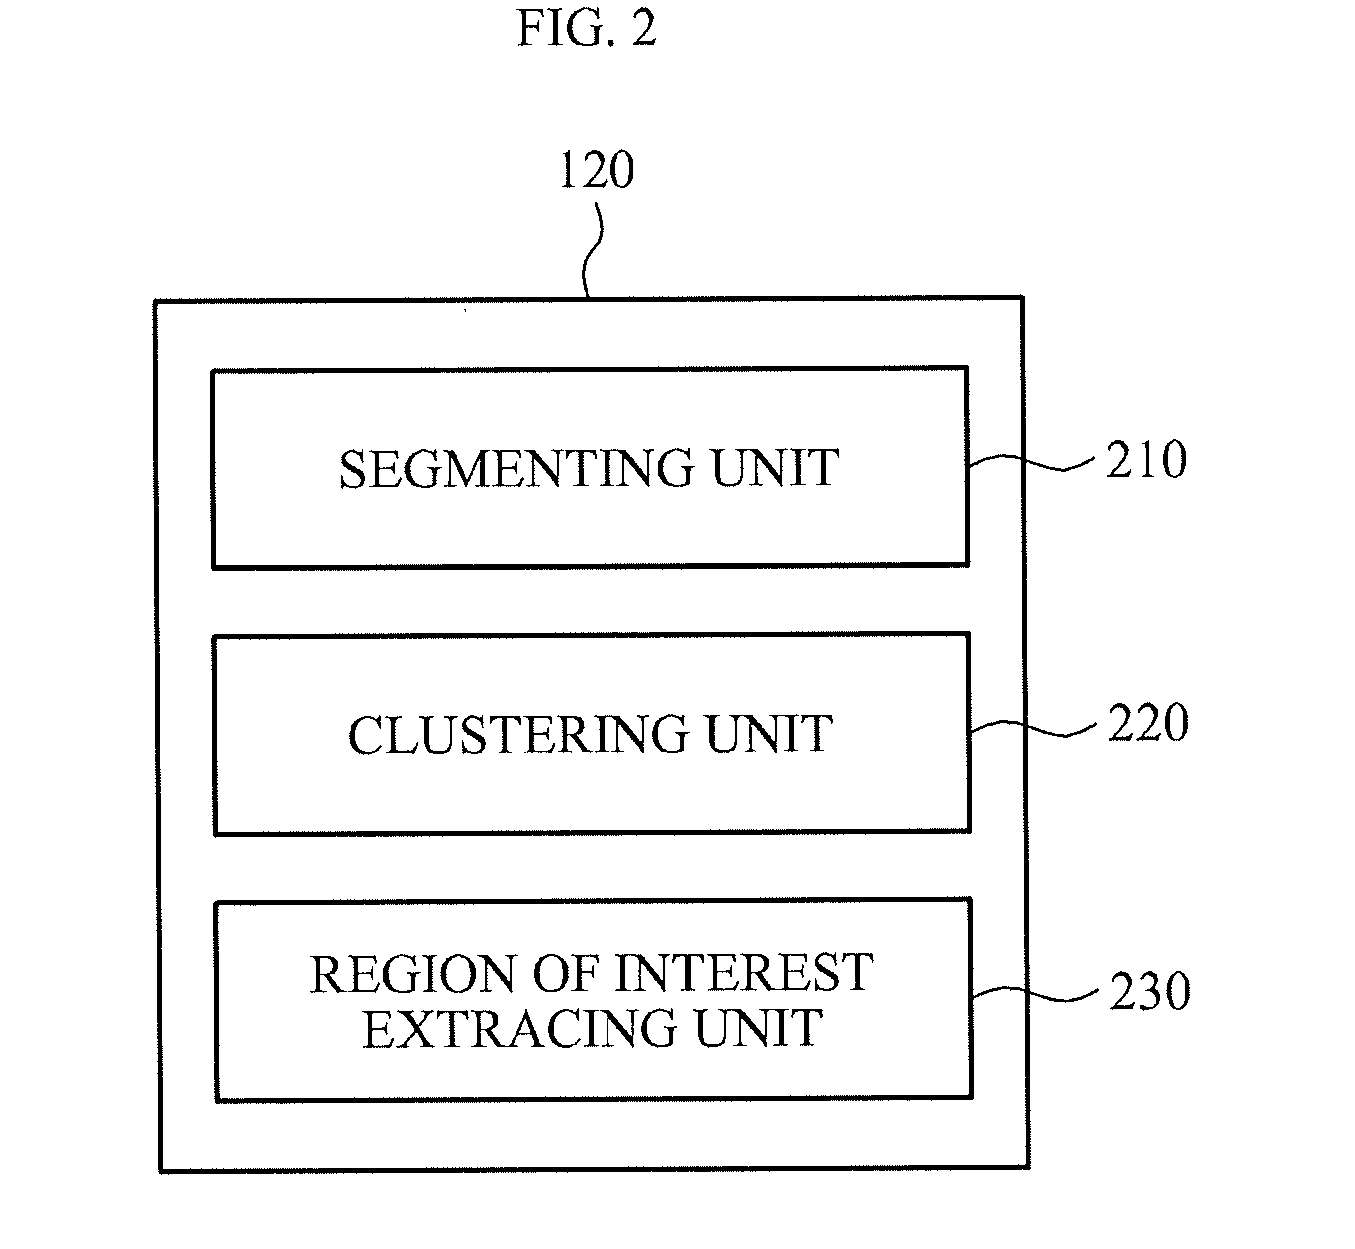 Method and apparatus for analyzing video based on spatiotemporal patterns